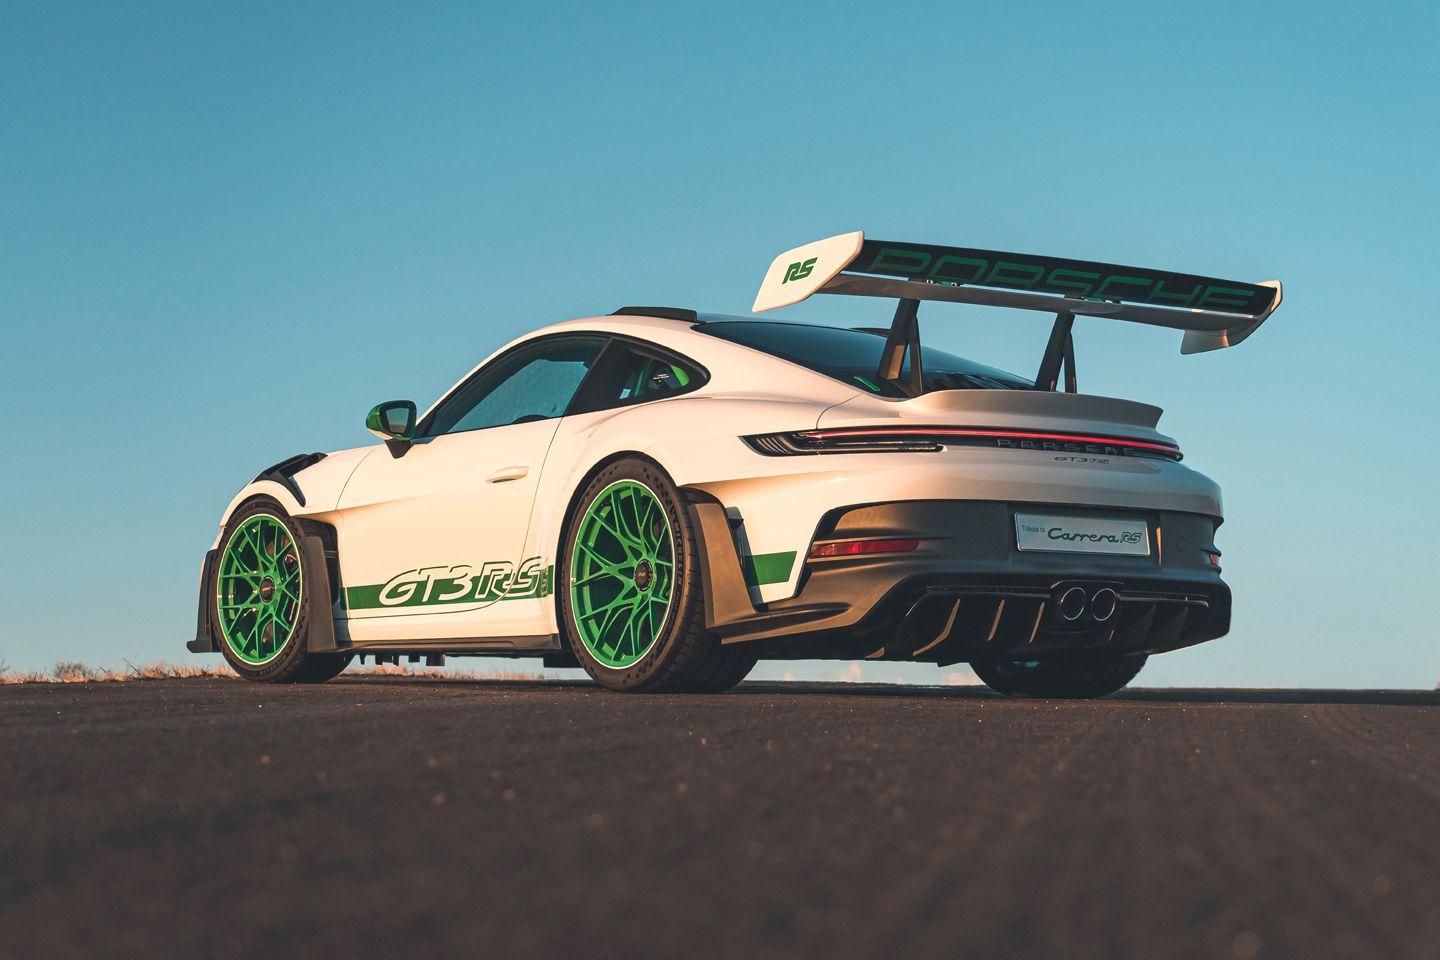 This is the best car you can buy. Period. Porsche 911 GT3 RS review